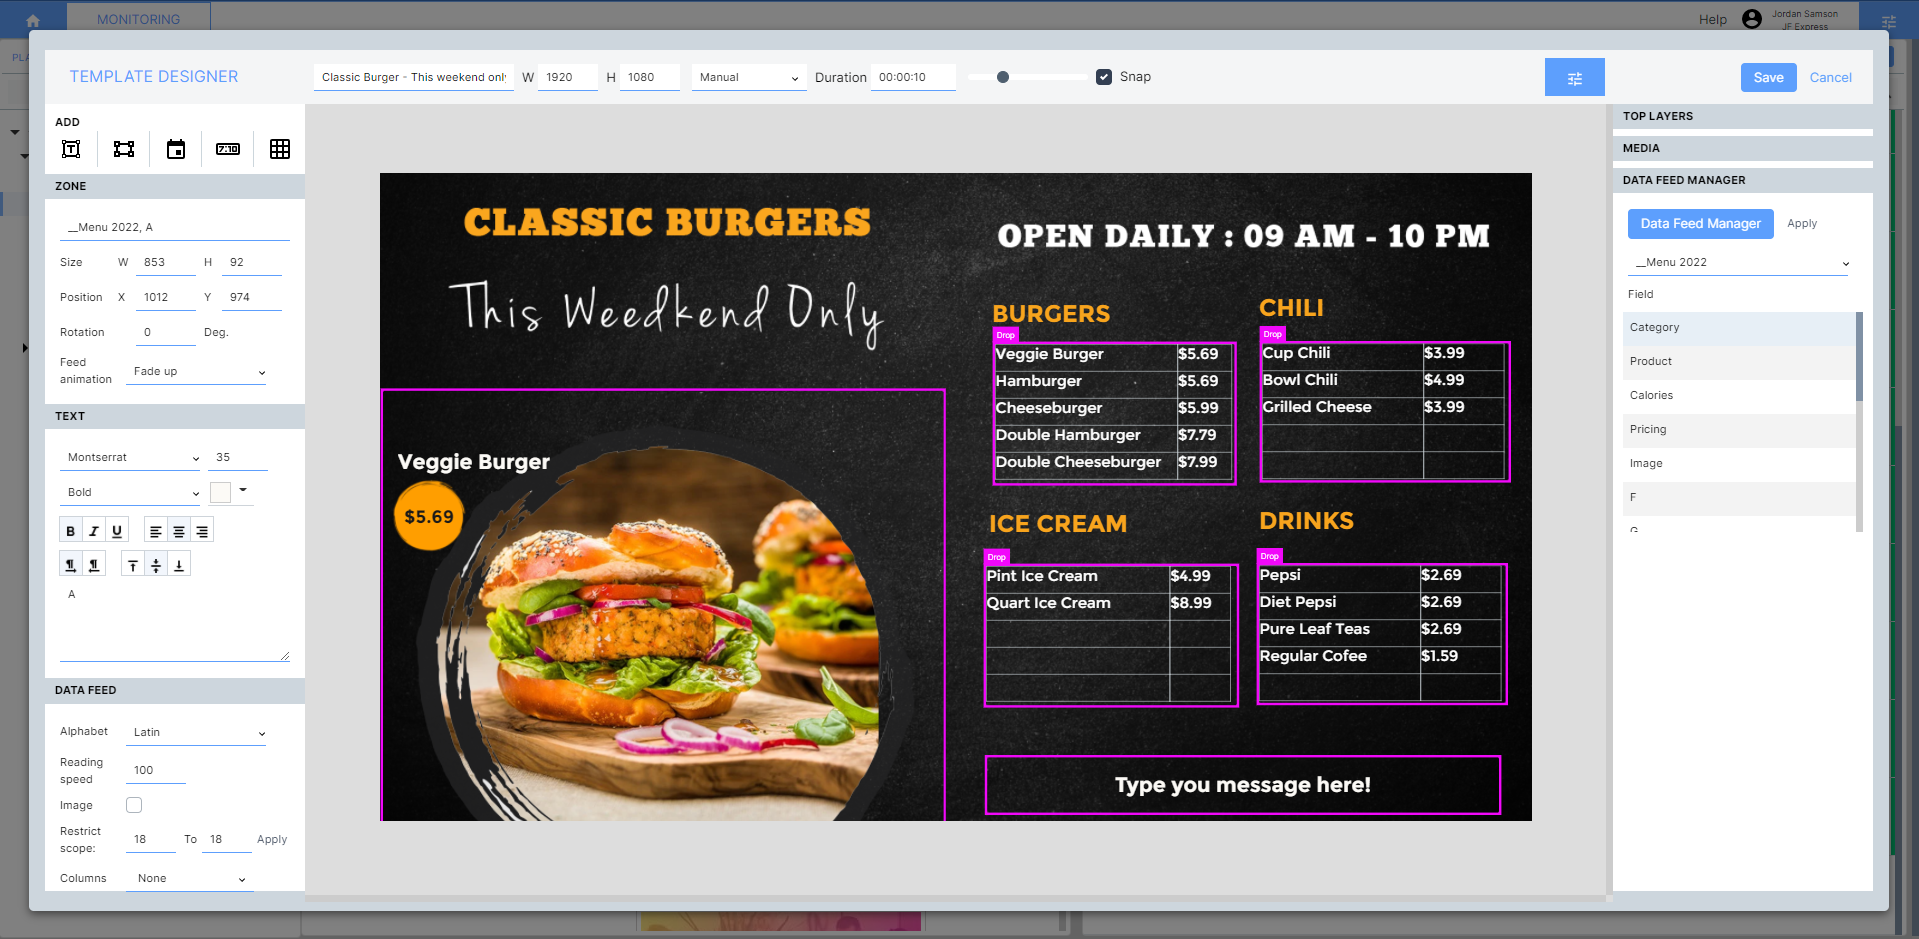 QL Digital Signage Software Software - Built-in Template Designer and Data Feed Manager